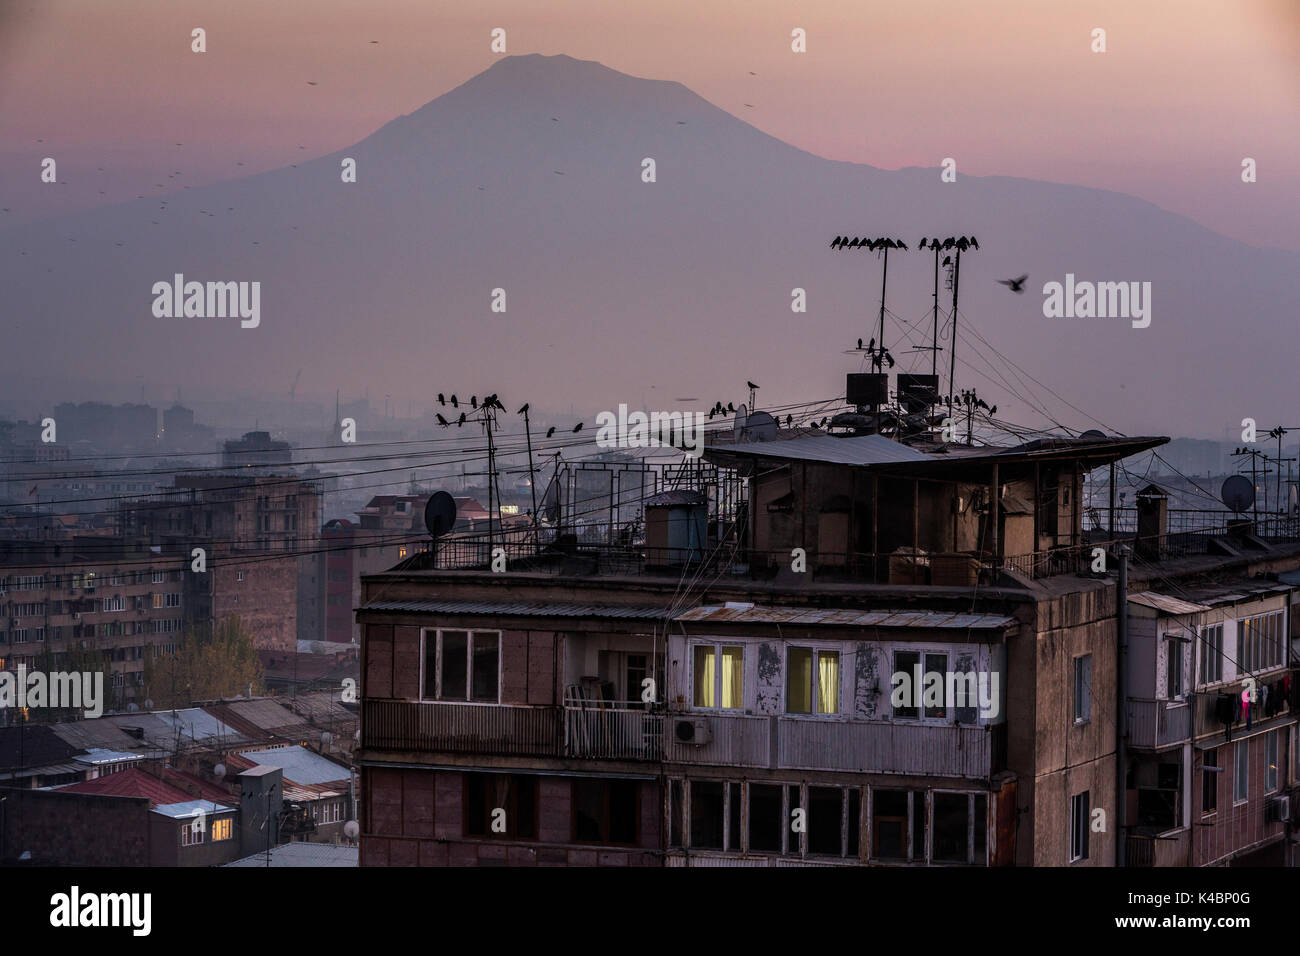 Cityscape of Armenia's capital Yerevan in front of Mount Ararat in the evening mood. Stock Photo